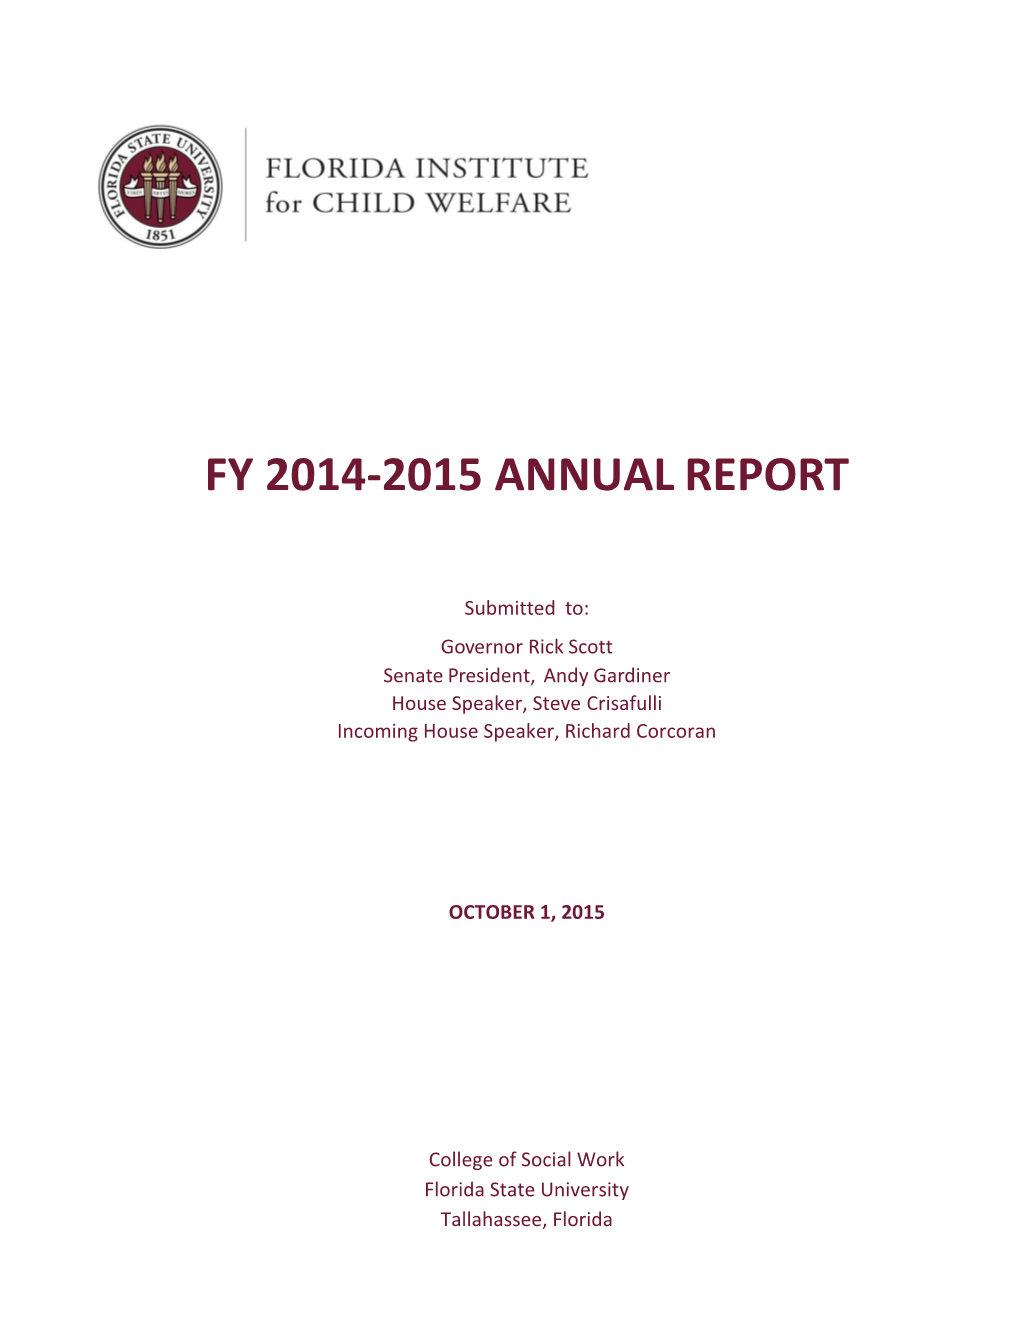 Fy 2014-2015 Annual Report